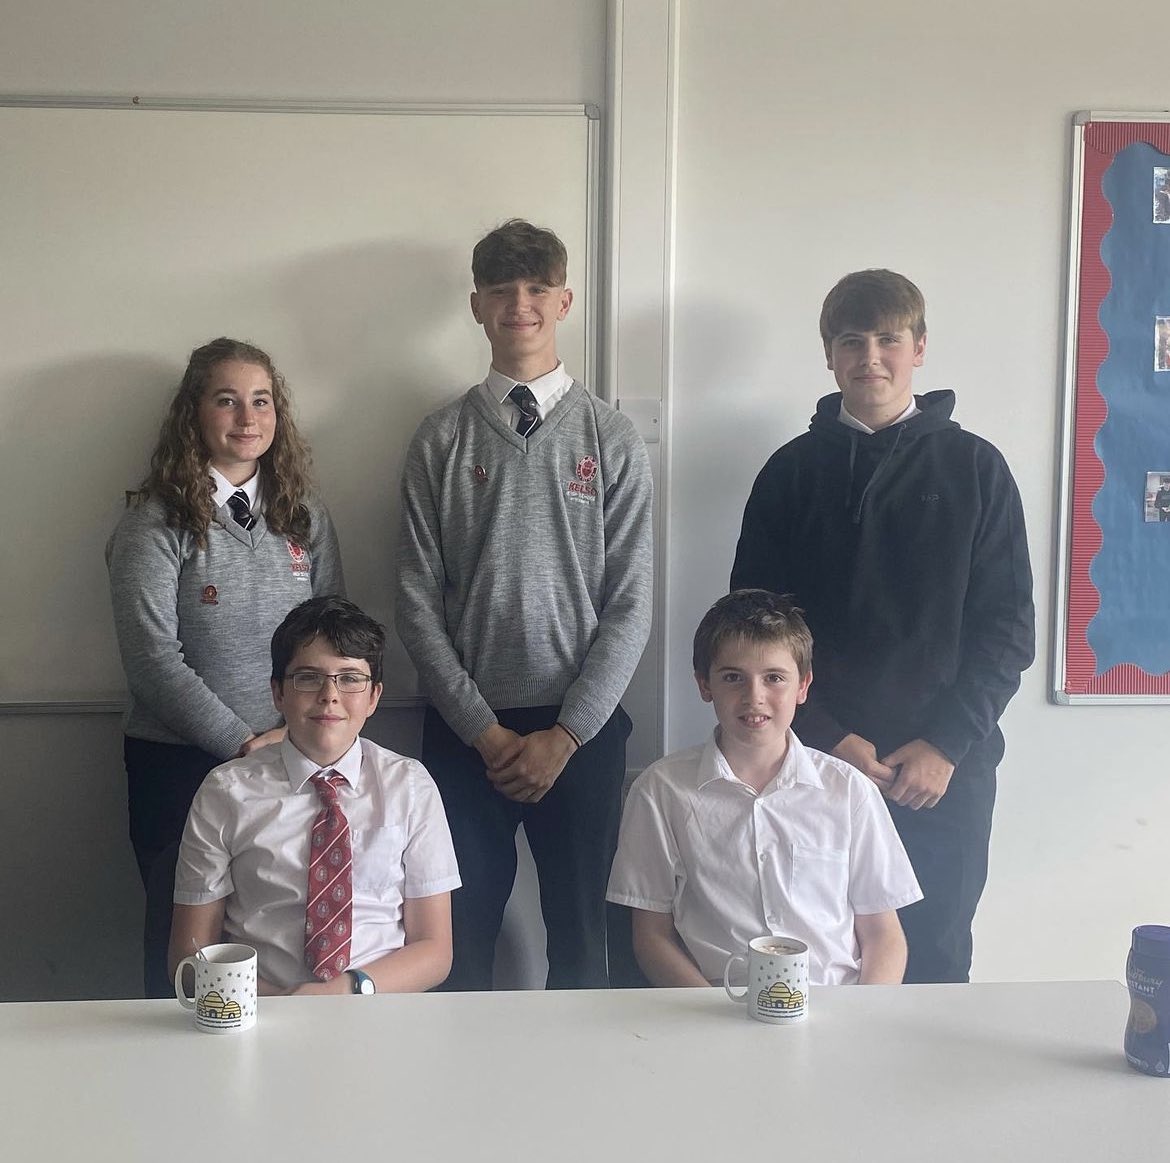 Our Head Team host our ‘Hot Chocolate Friday’ 🍫each week where those young people who have gone above and beyond in school are recognised by having Hot Chocolate with Callum, Elsa, Will and Abi. Well done to this week’s winners Magnus and Gavin 👏🏼🎉. #pridekhs #pupilleadership